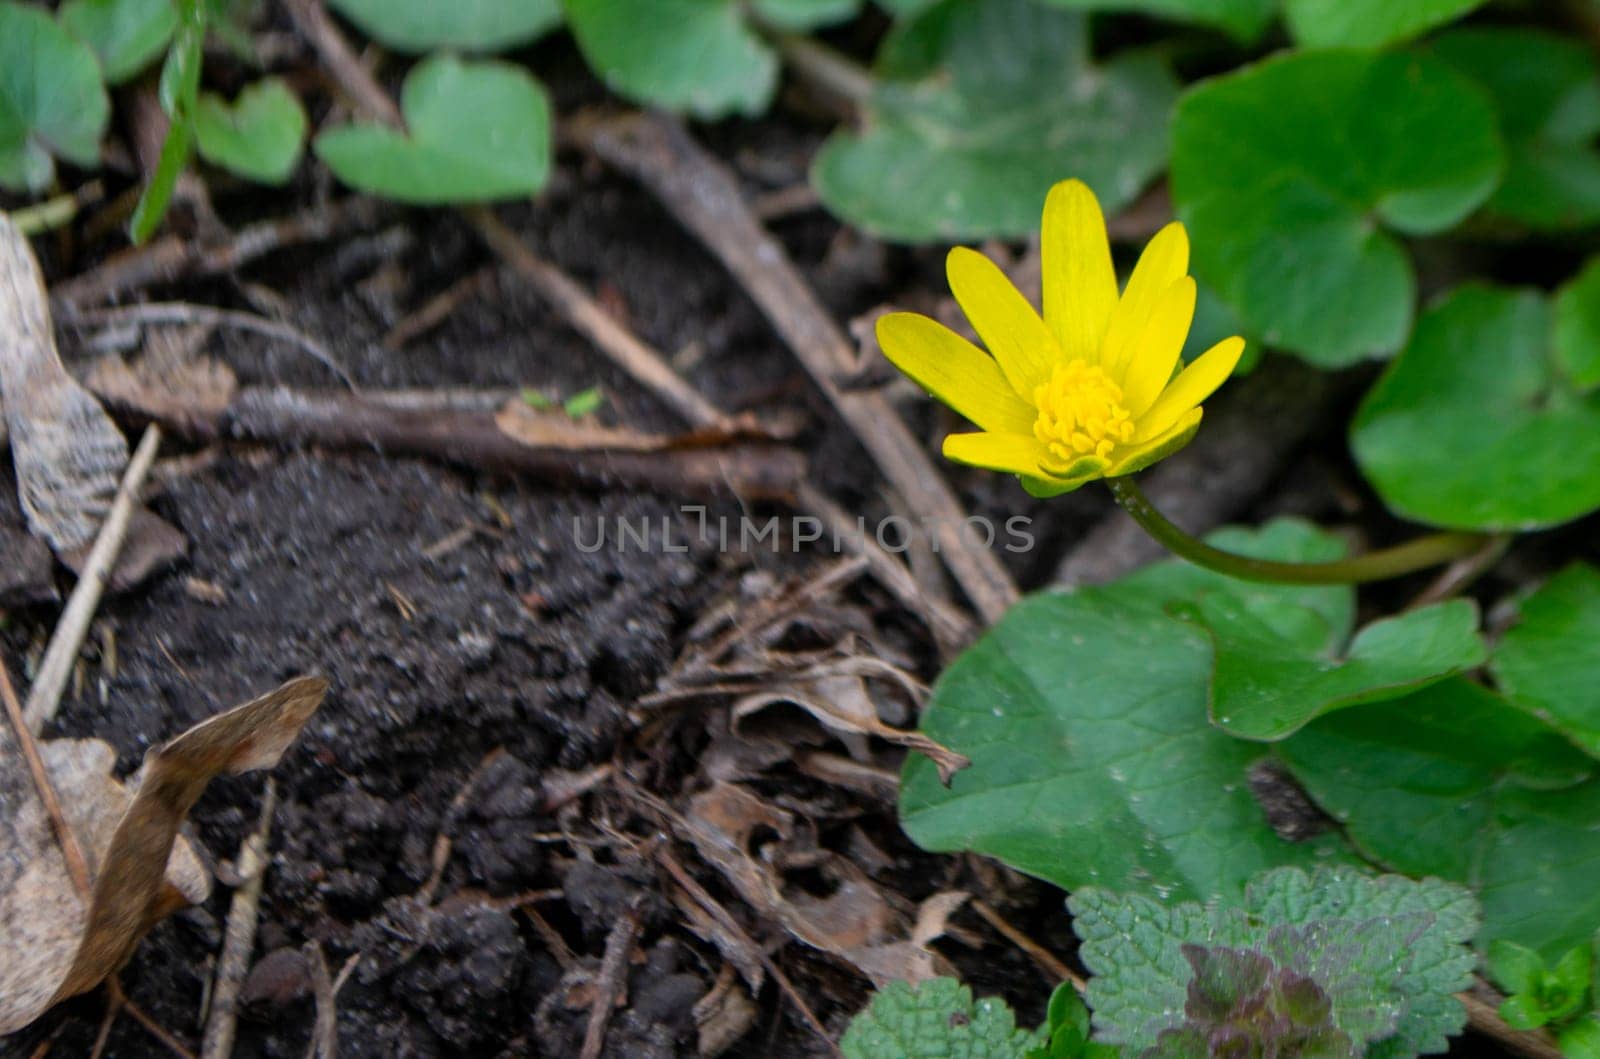 Flower kaluga. yellow spring flowers. A field of yellow flowers with green leaves and one has a black bug on it. High quality photo